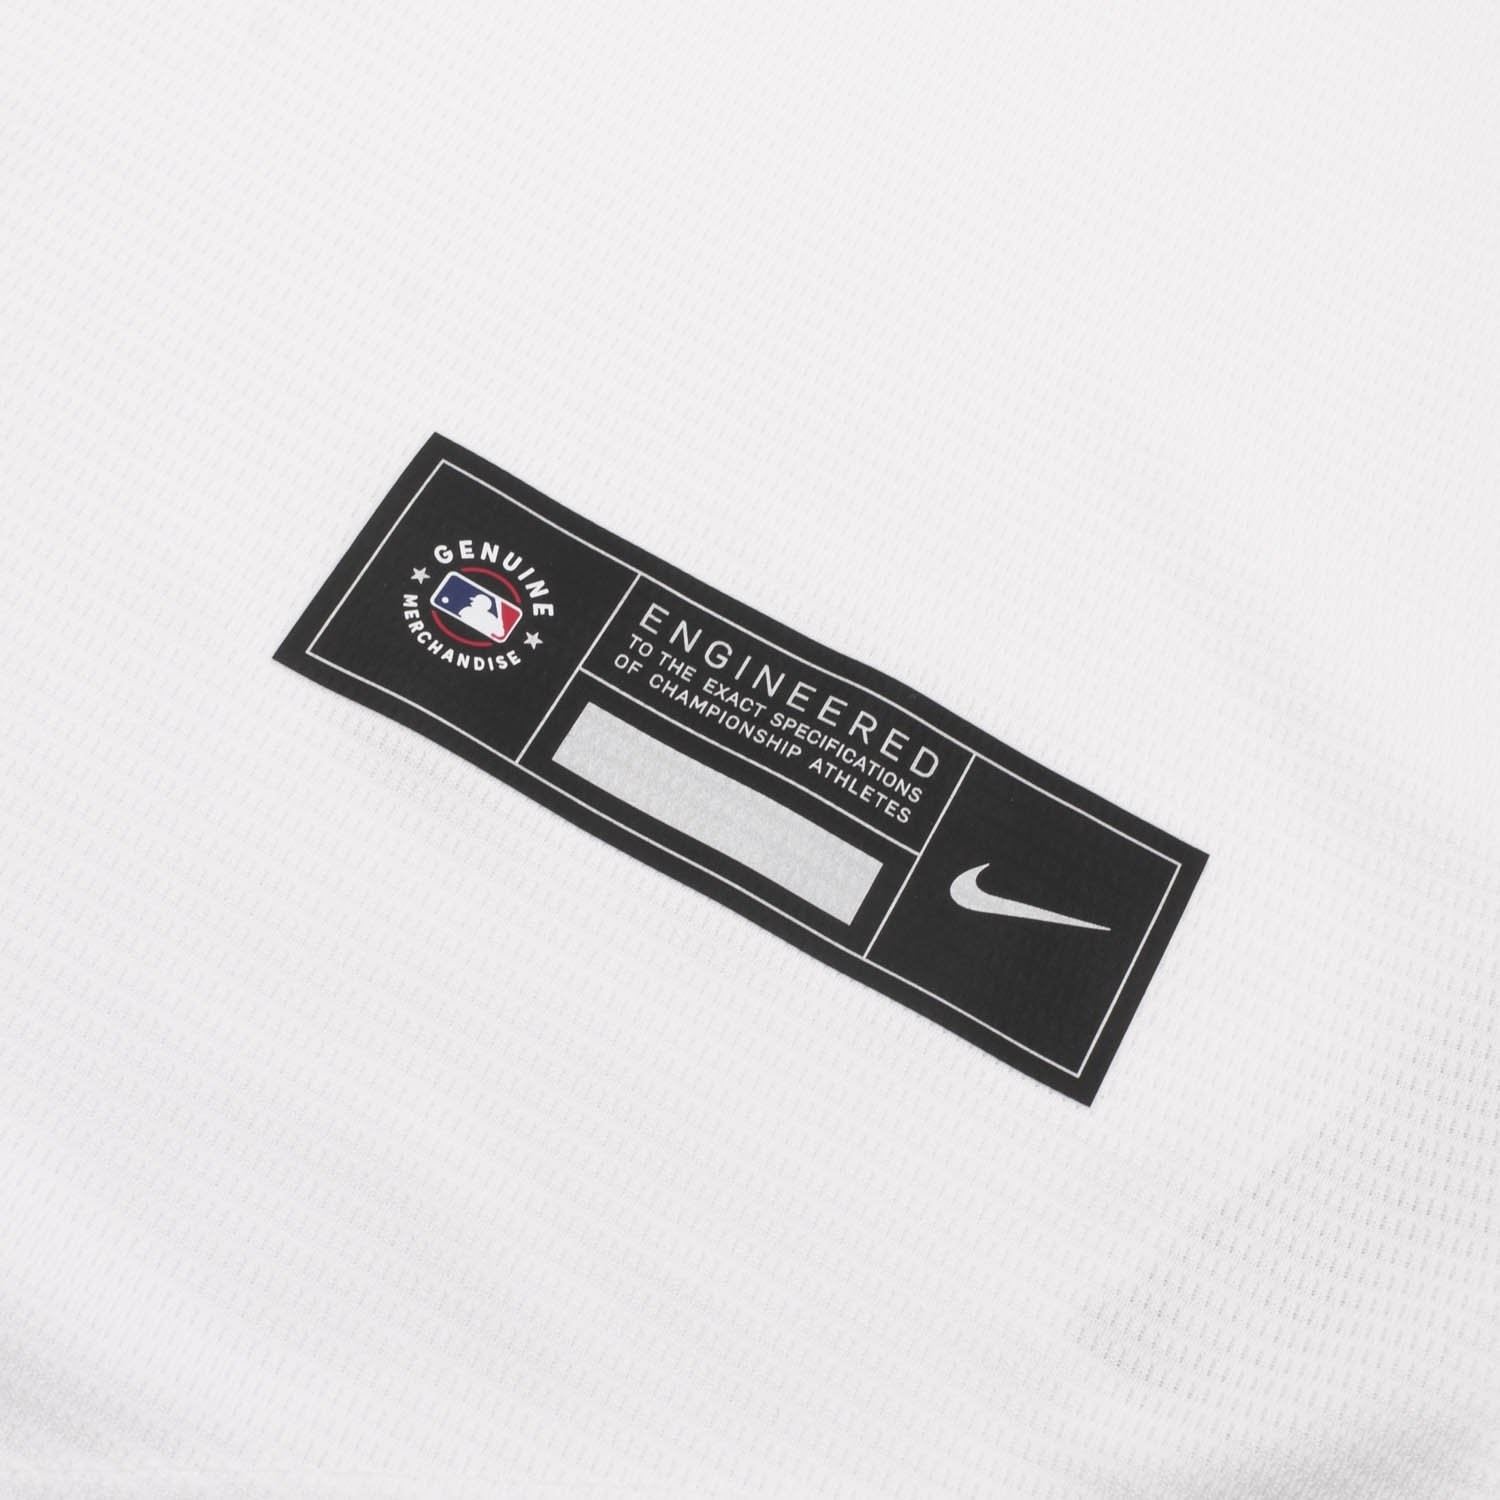 Los Angeles Dodgers Official MLB Replica Home Jersey White Nike